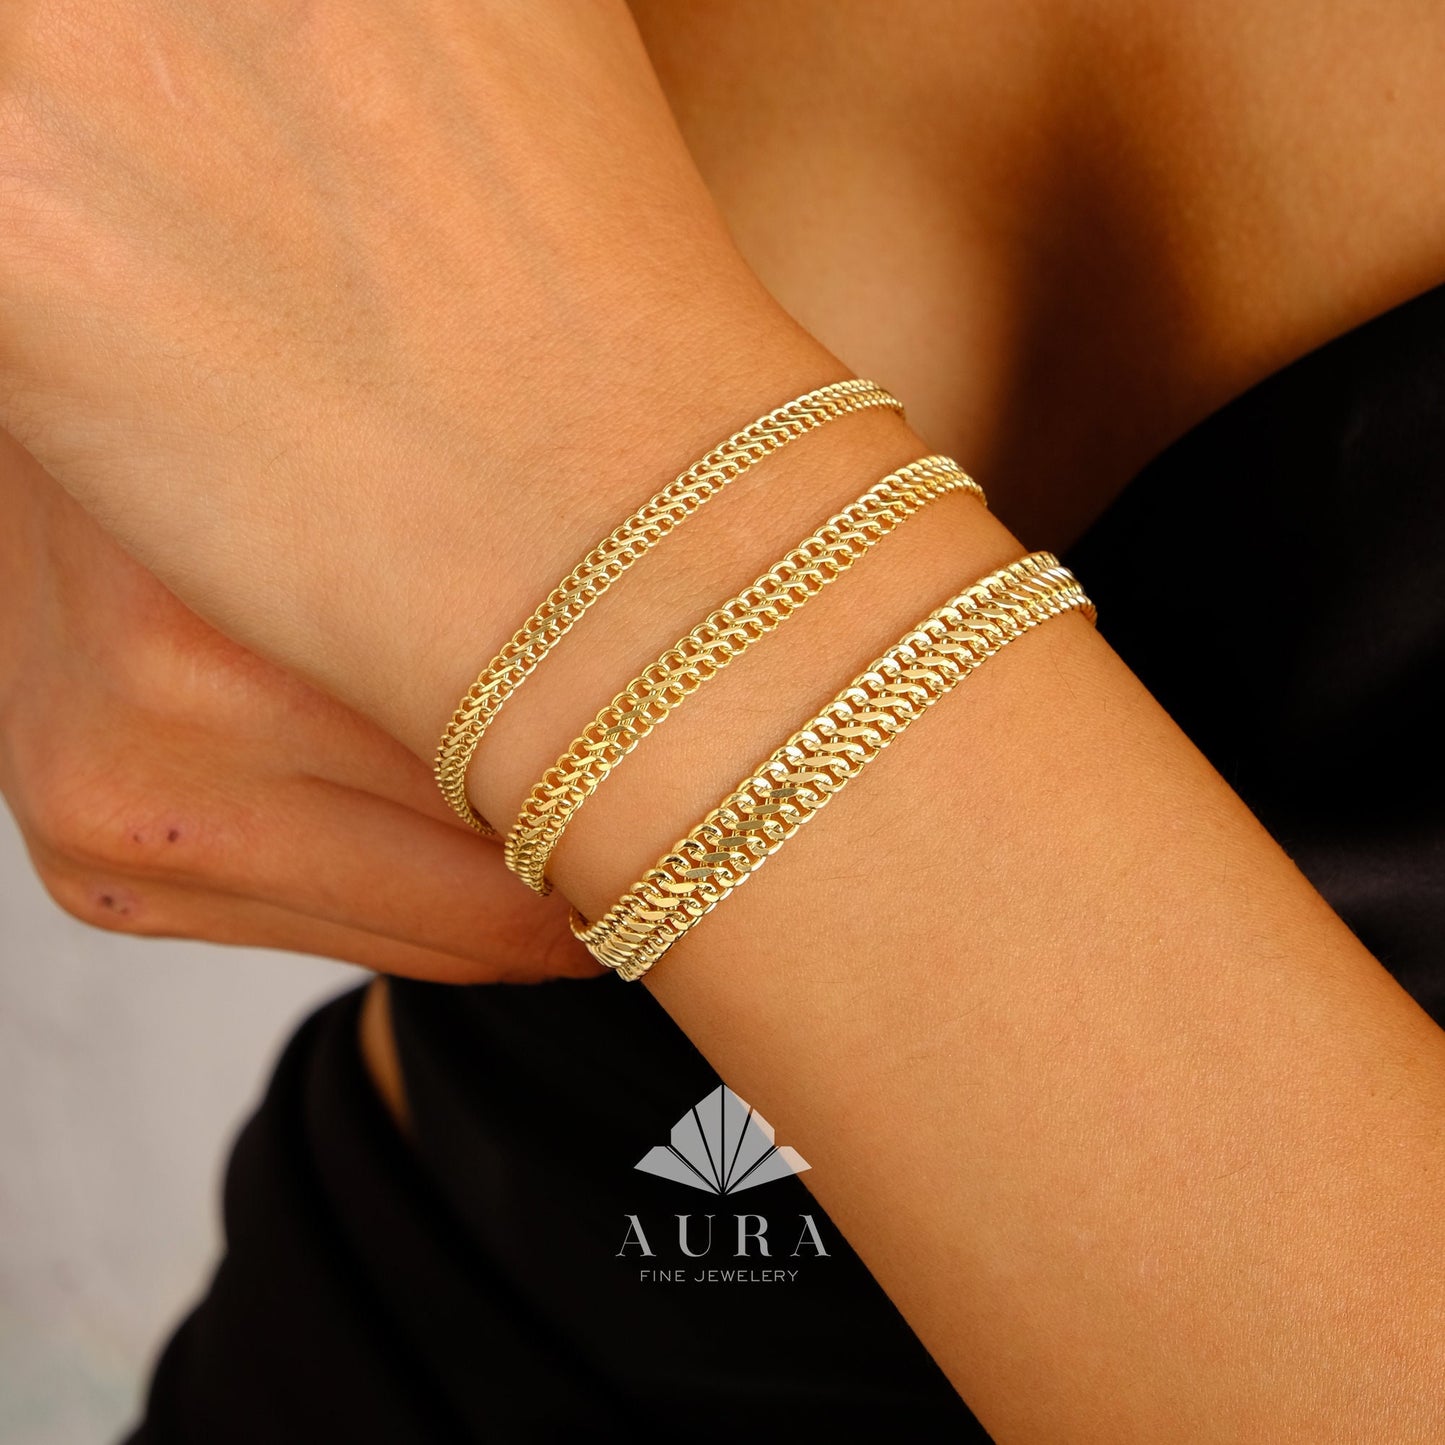 14K Gold Vienna Bracelet, Double Curb Chain Bracelet, Armoured Chain, Minimalist Women Jewelry, Handmade Layering Chain, Gift for Her